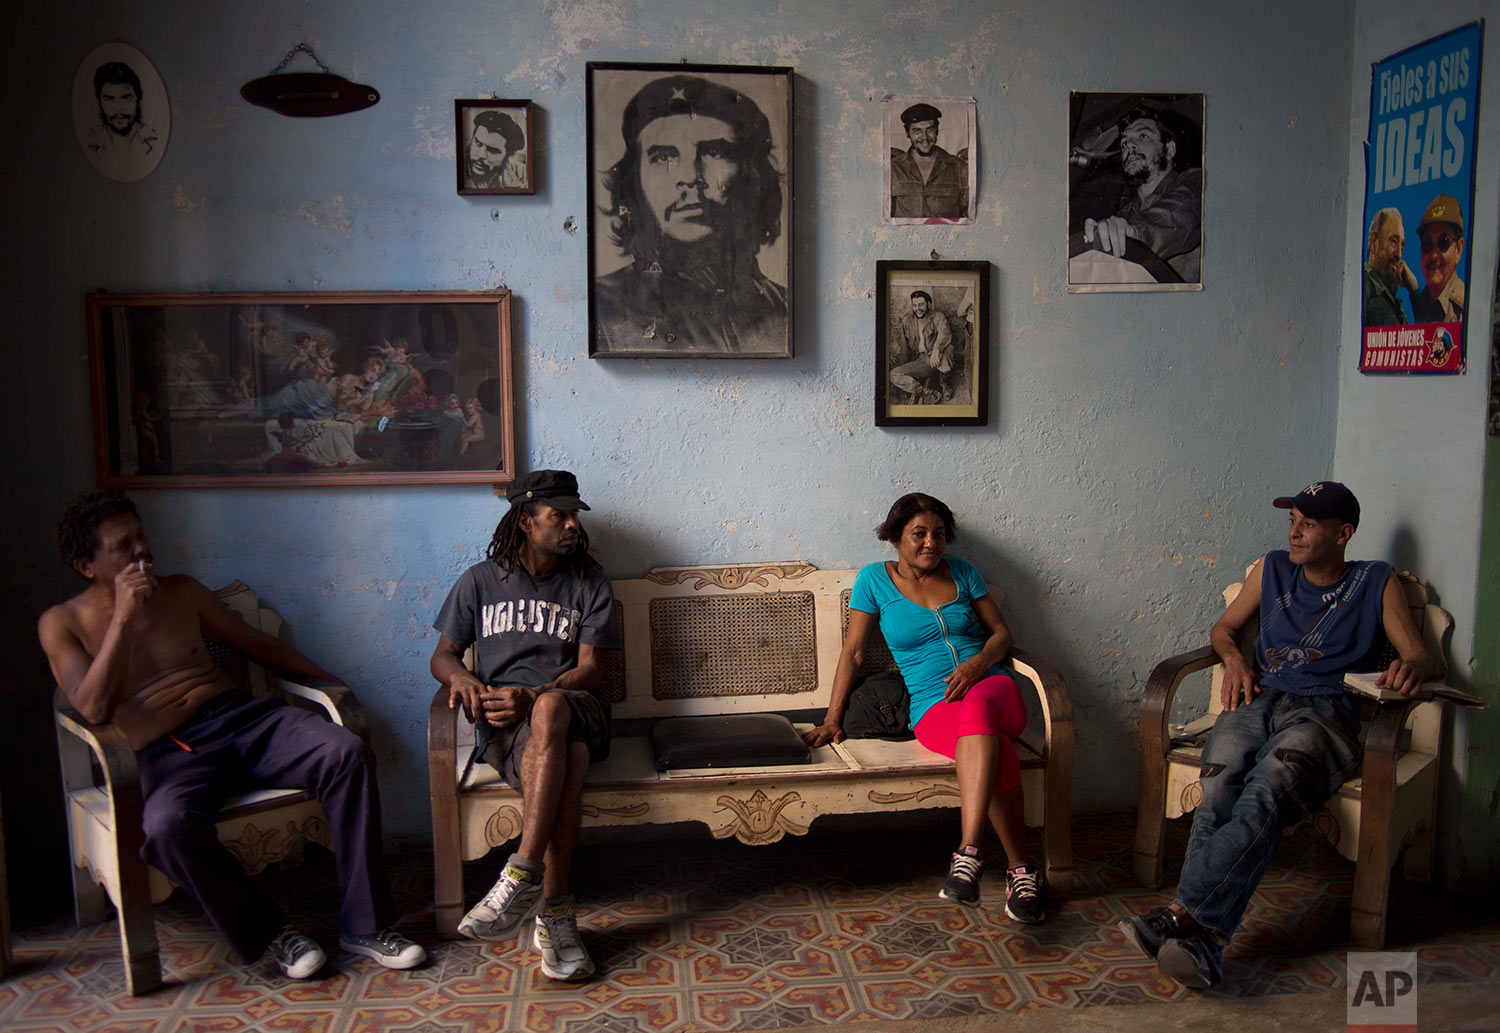  Roberto Alvarez, 47, right, chats with friends backdropped by a wall decorated with images of Cuban revolutionary heroes, Che Guevara, Fidel Castro and his brother, President Raul Castro, in Havana, Cuba, Wednesday, Feb. 25, 2015. (AP Photo/Ramon Es